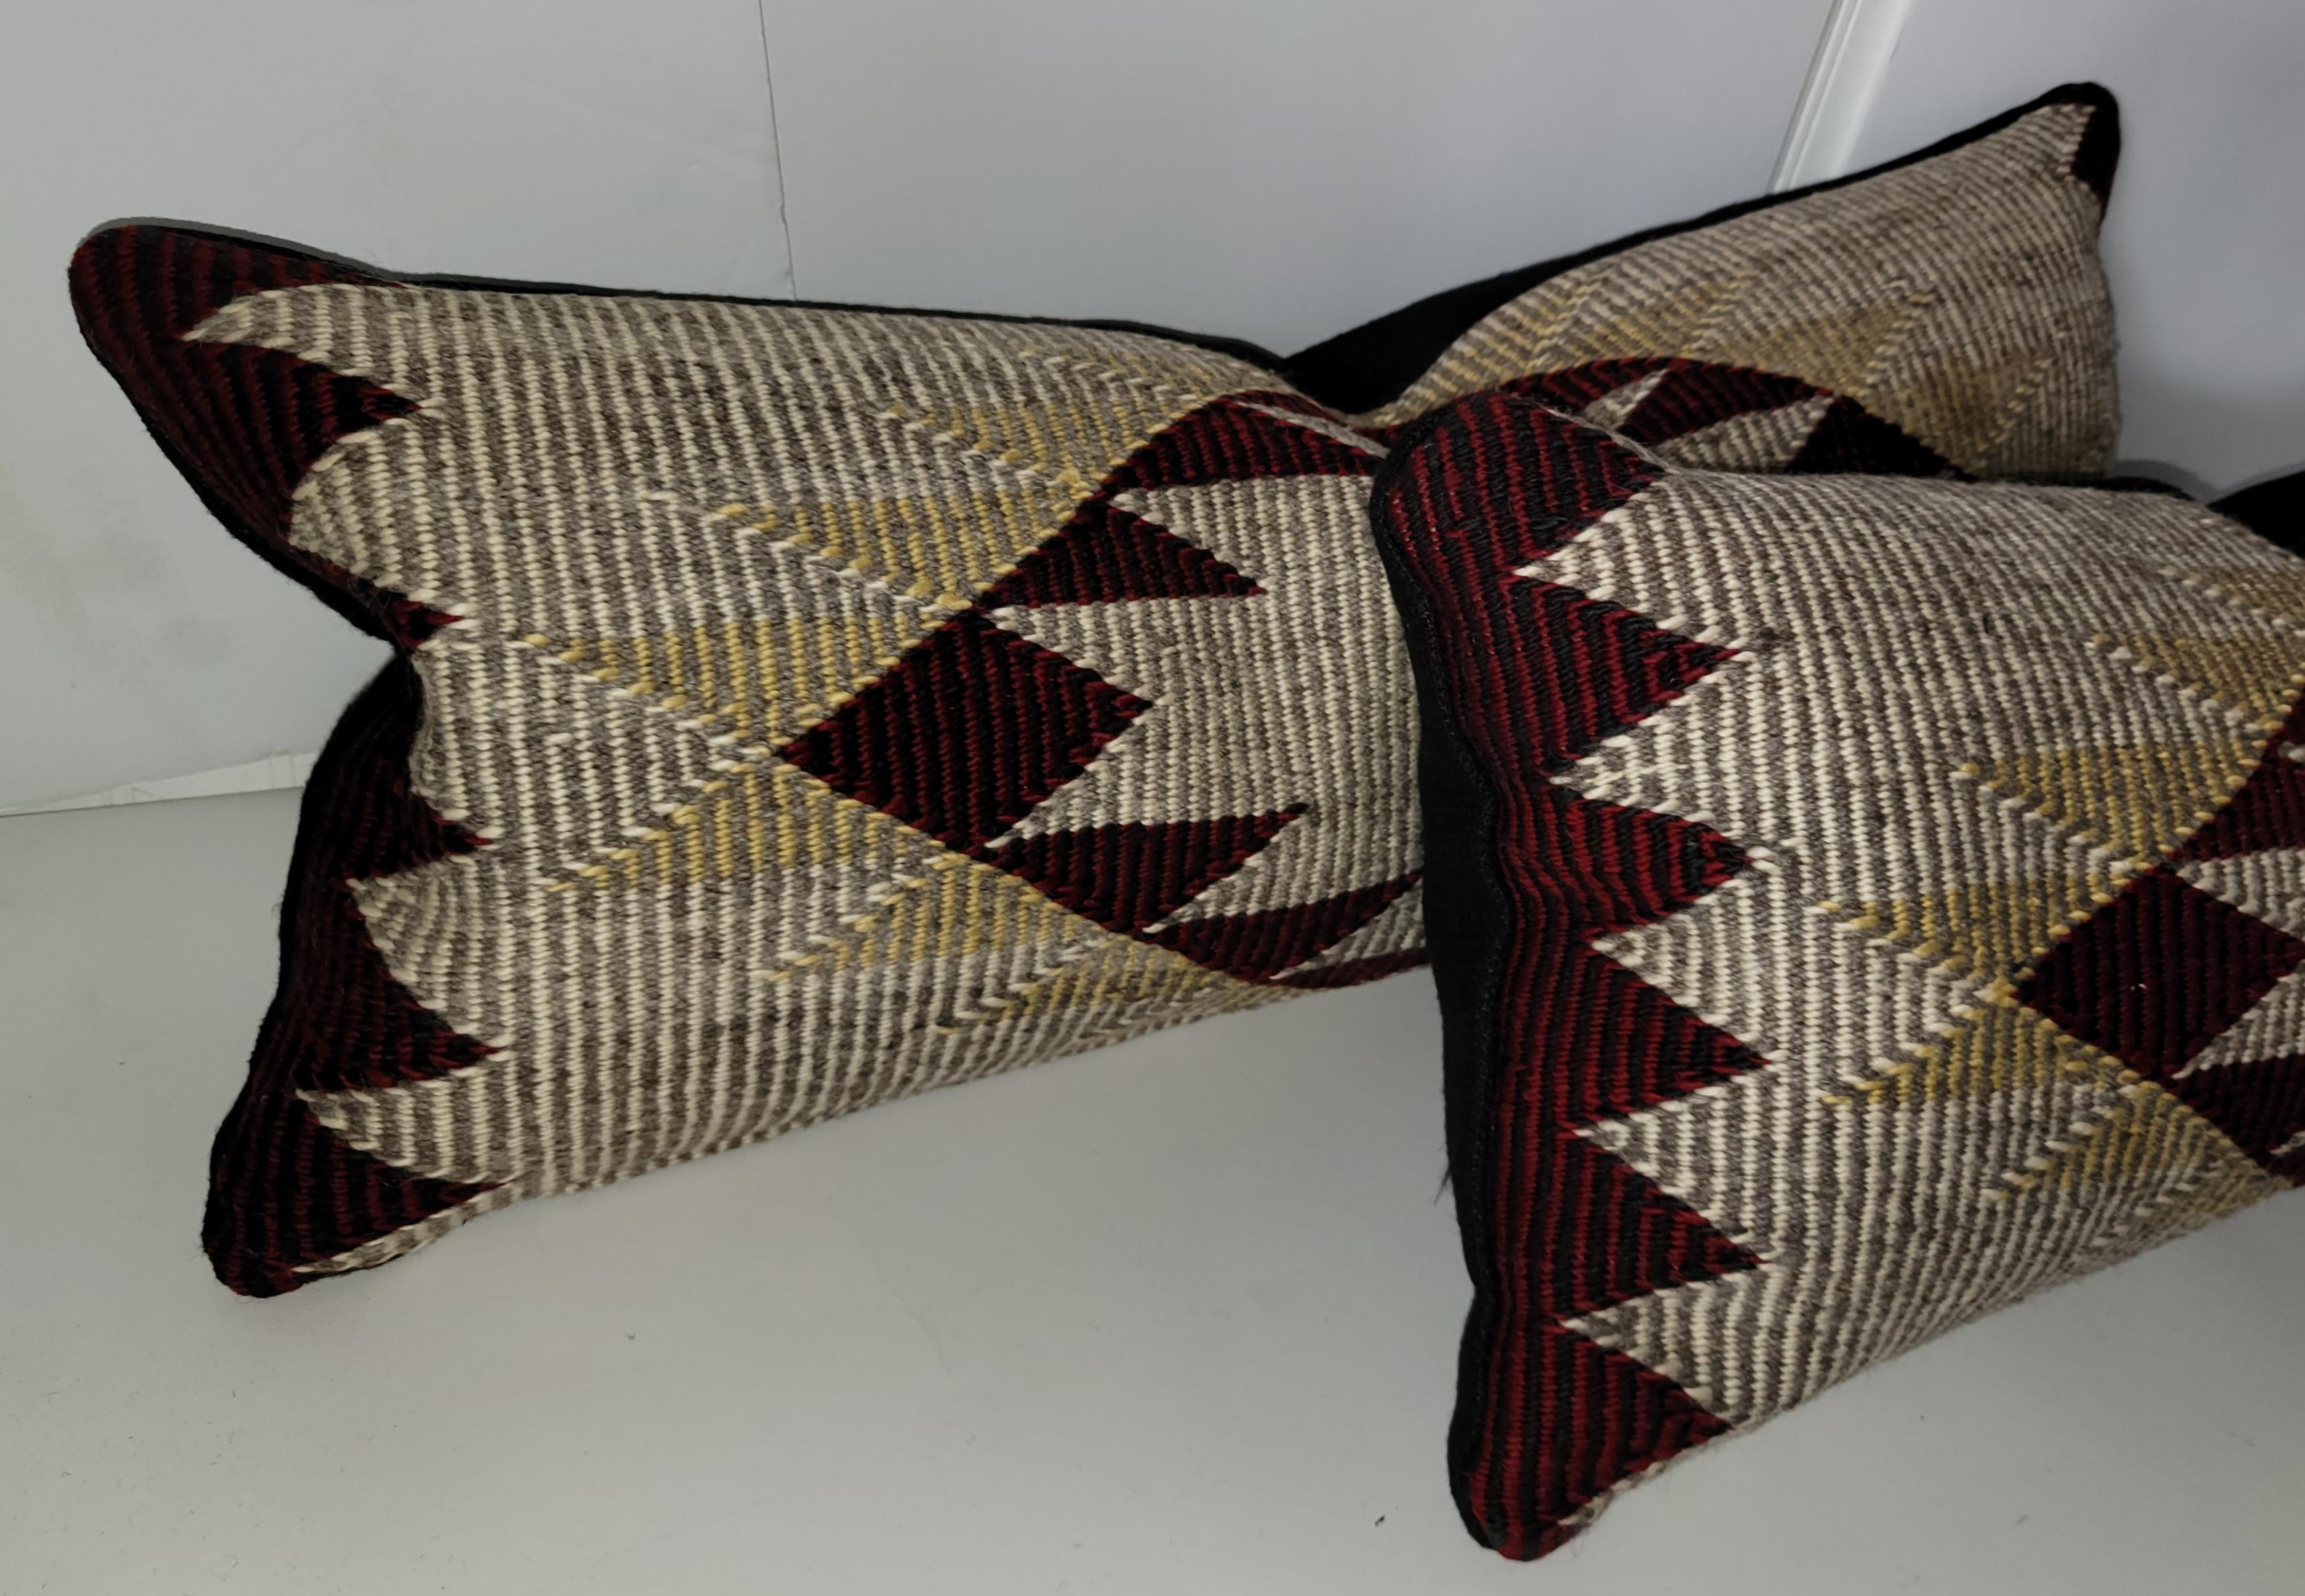 Pair of 20th C Beautiful Navajo Eye Dazzler Bolster Pillows. New Feather and Down insert and zipper casing for cleaning.